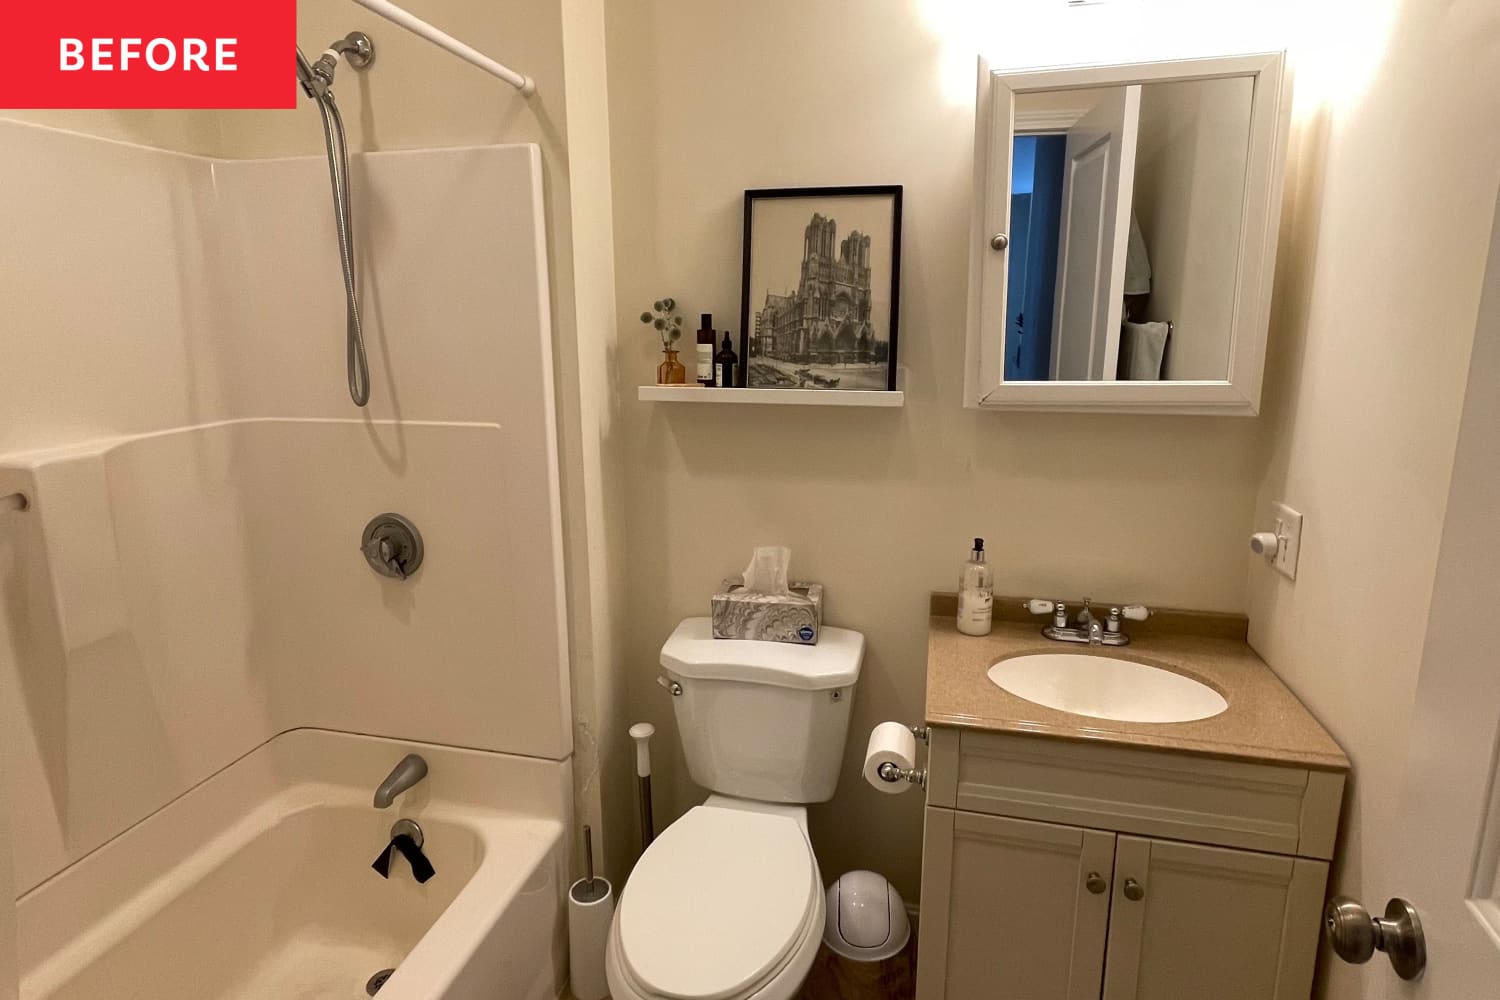 Before and After: A Builder-Grade Condo Bathroom Goes from “Shabby” to Chic in a $10,000 Redo